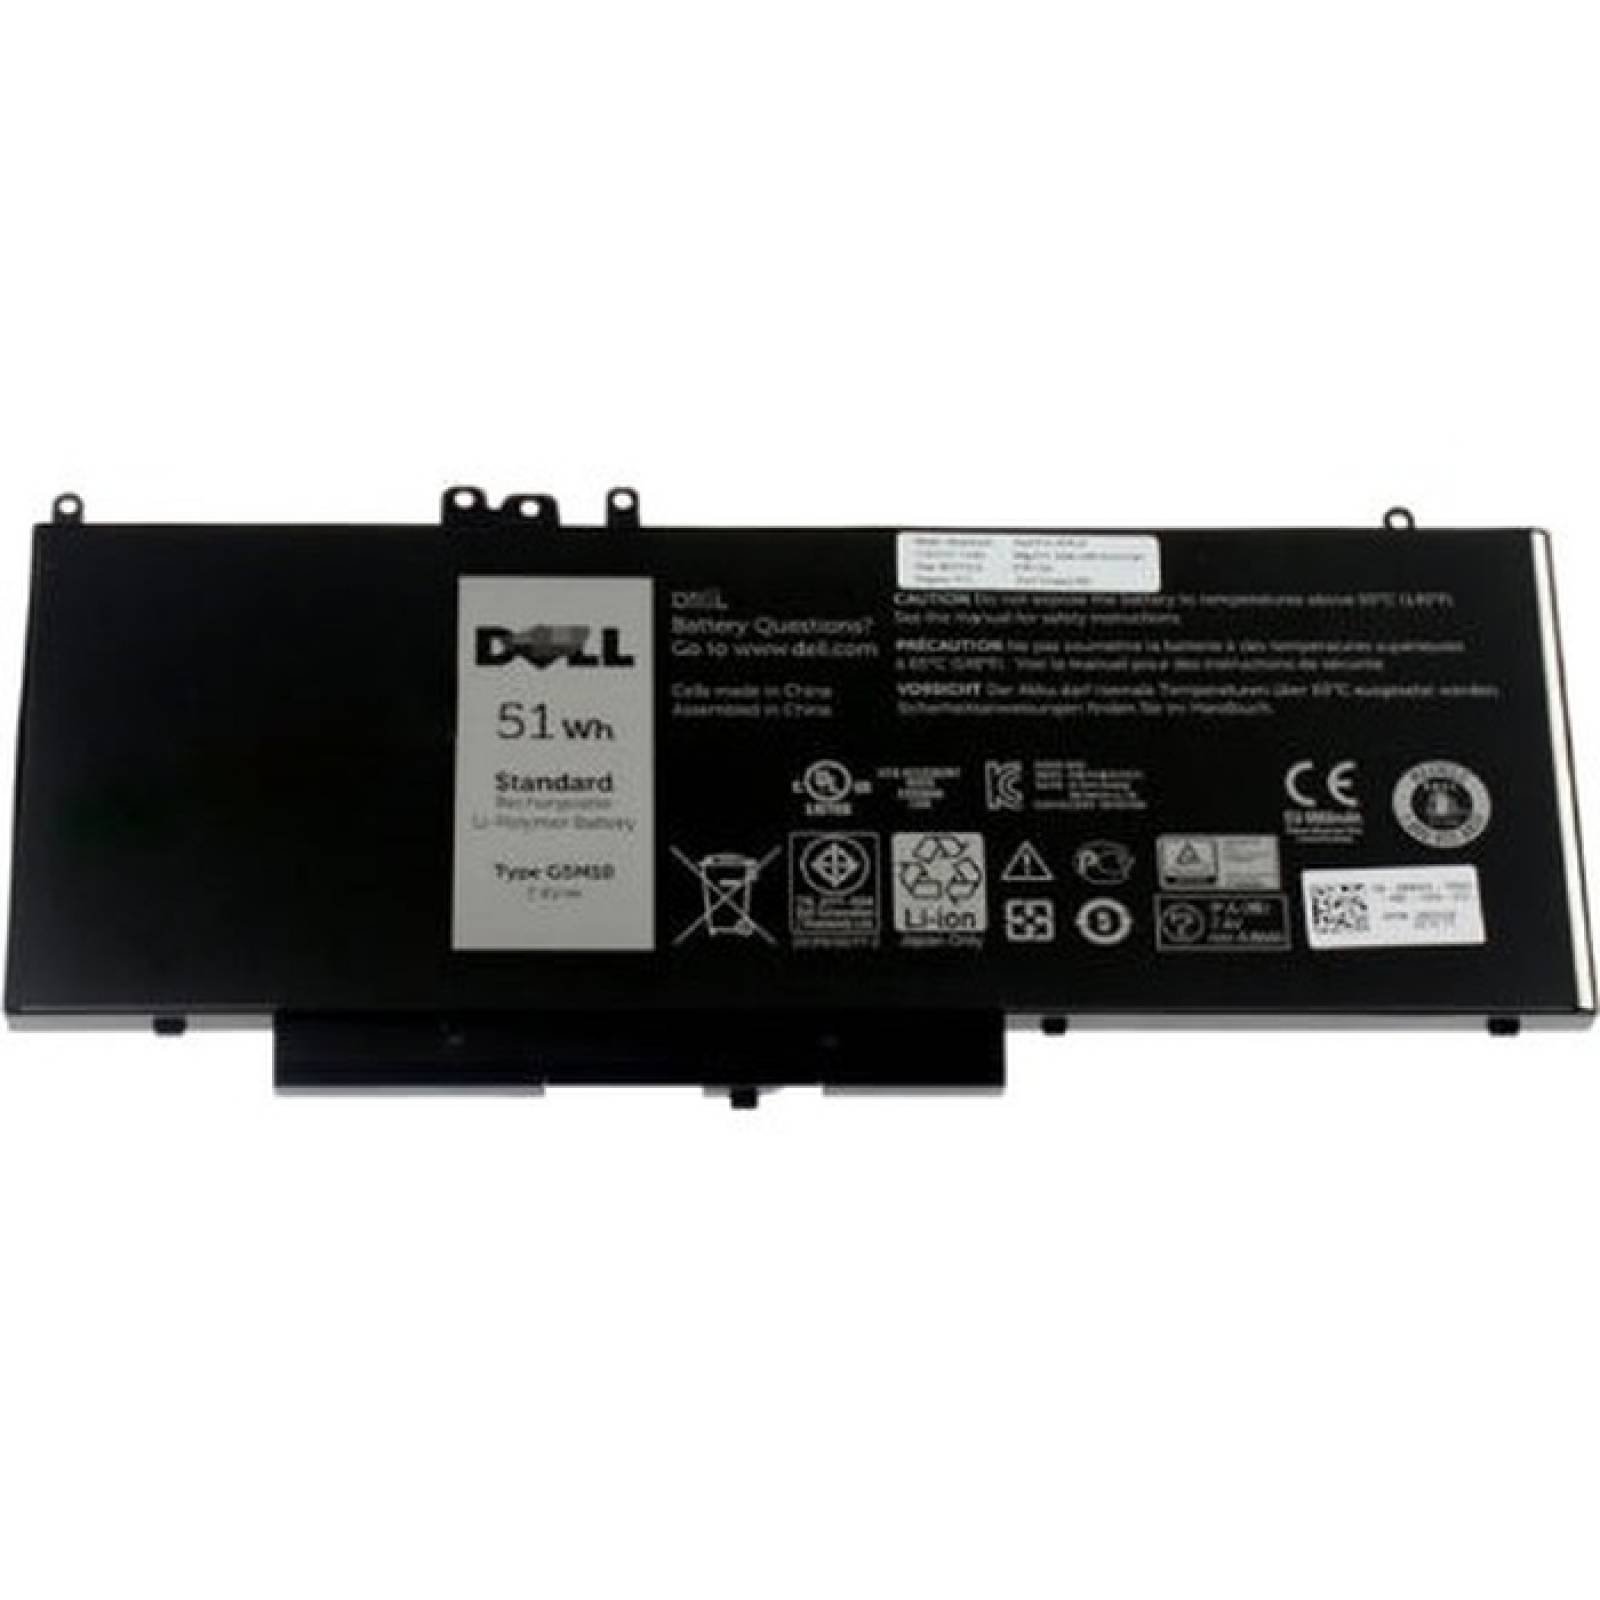 51W 4CELL BATTERY INSTALL  DISC PROD SPCL SOURCING VER NOTAS